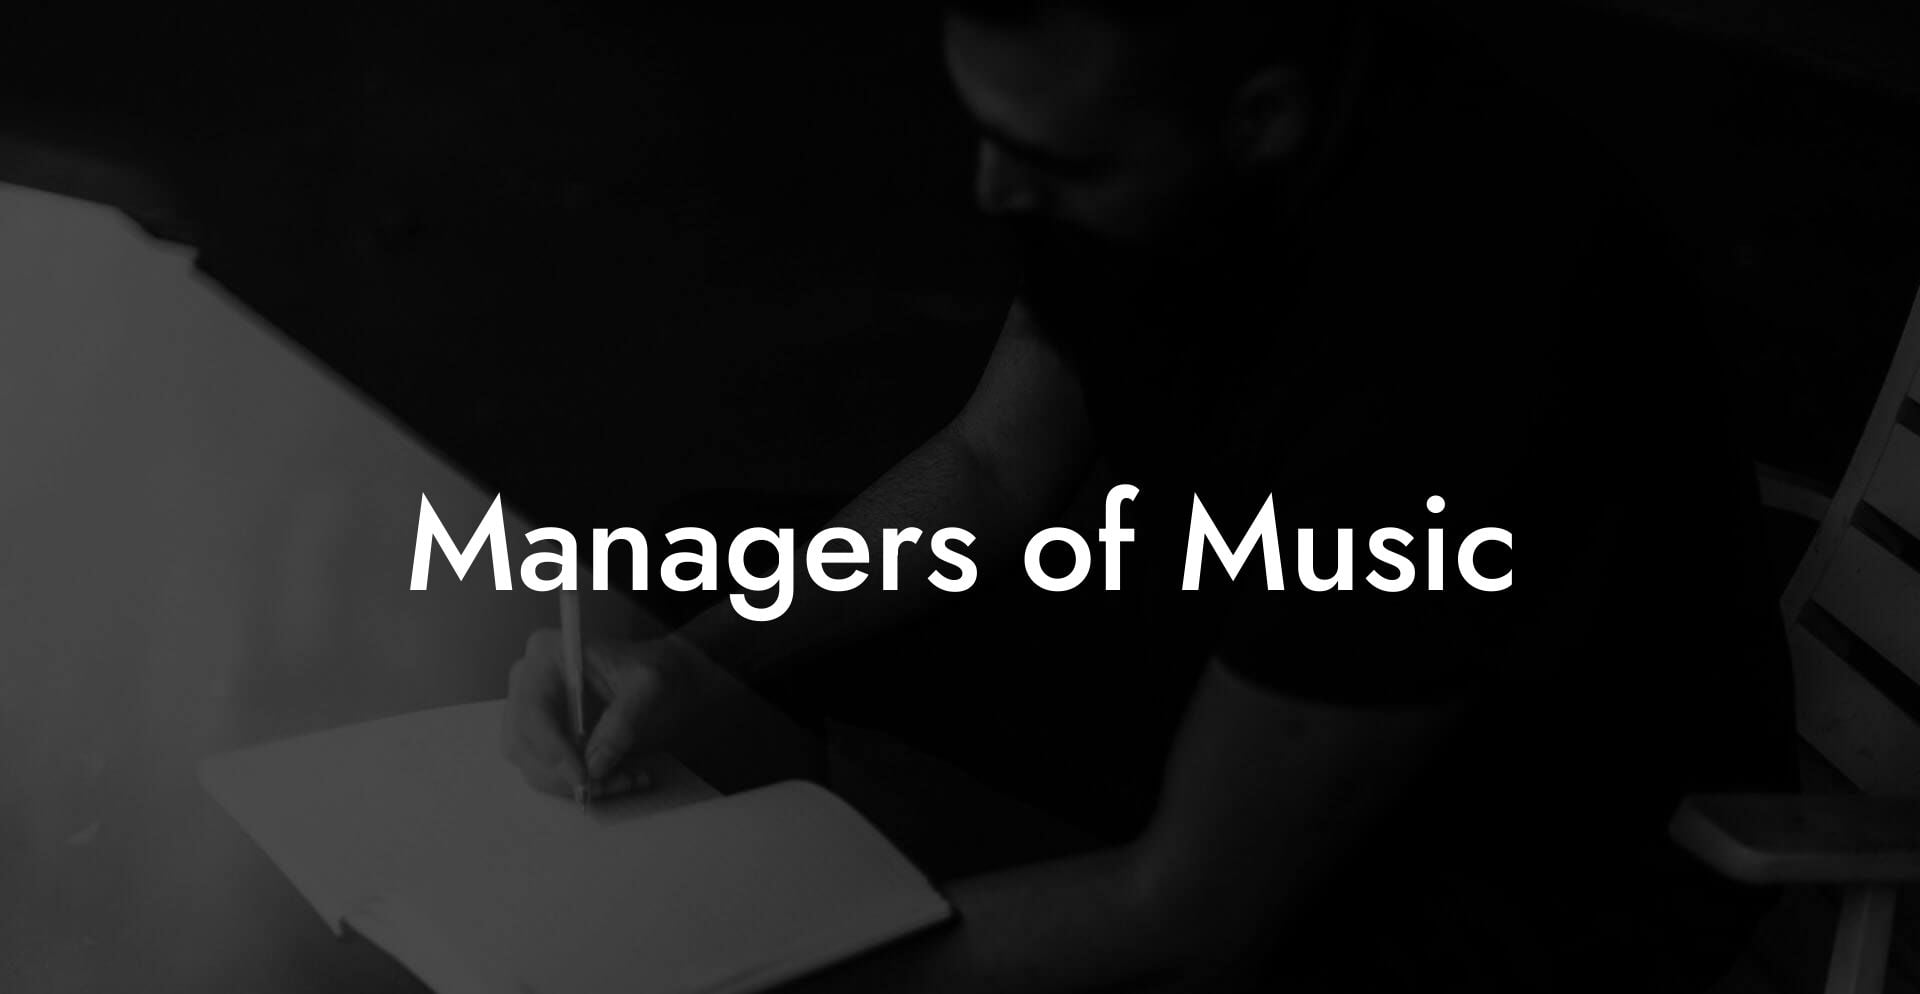 Managers of Music